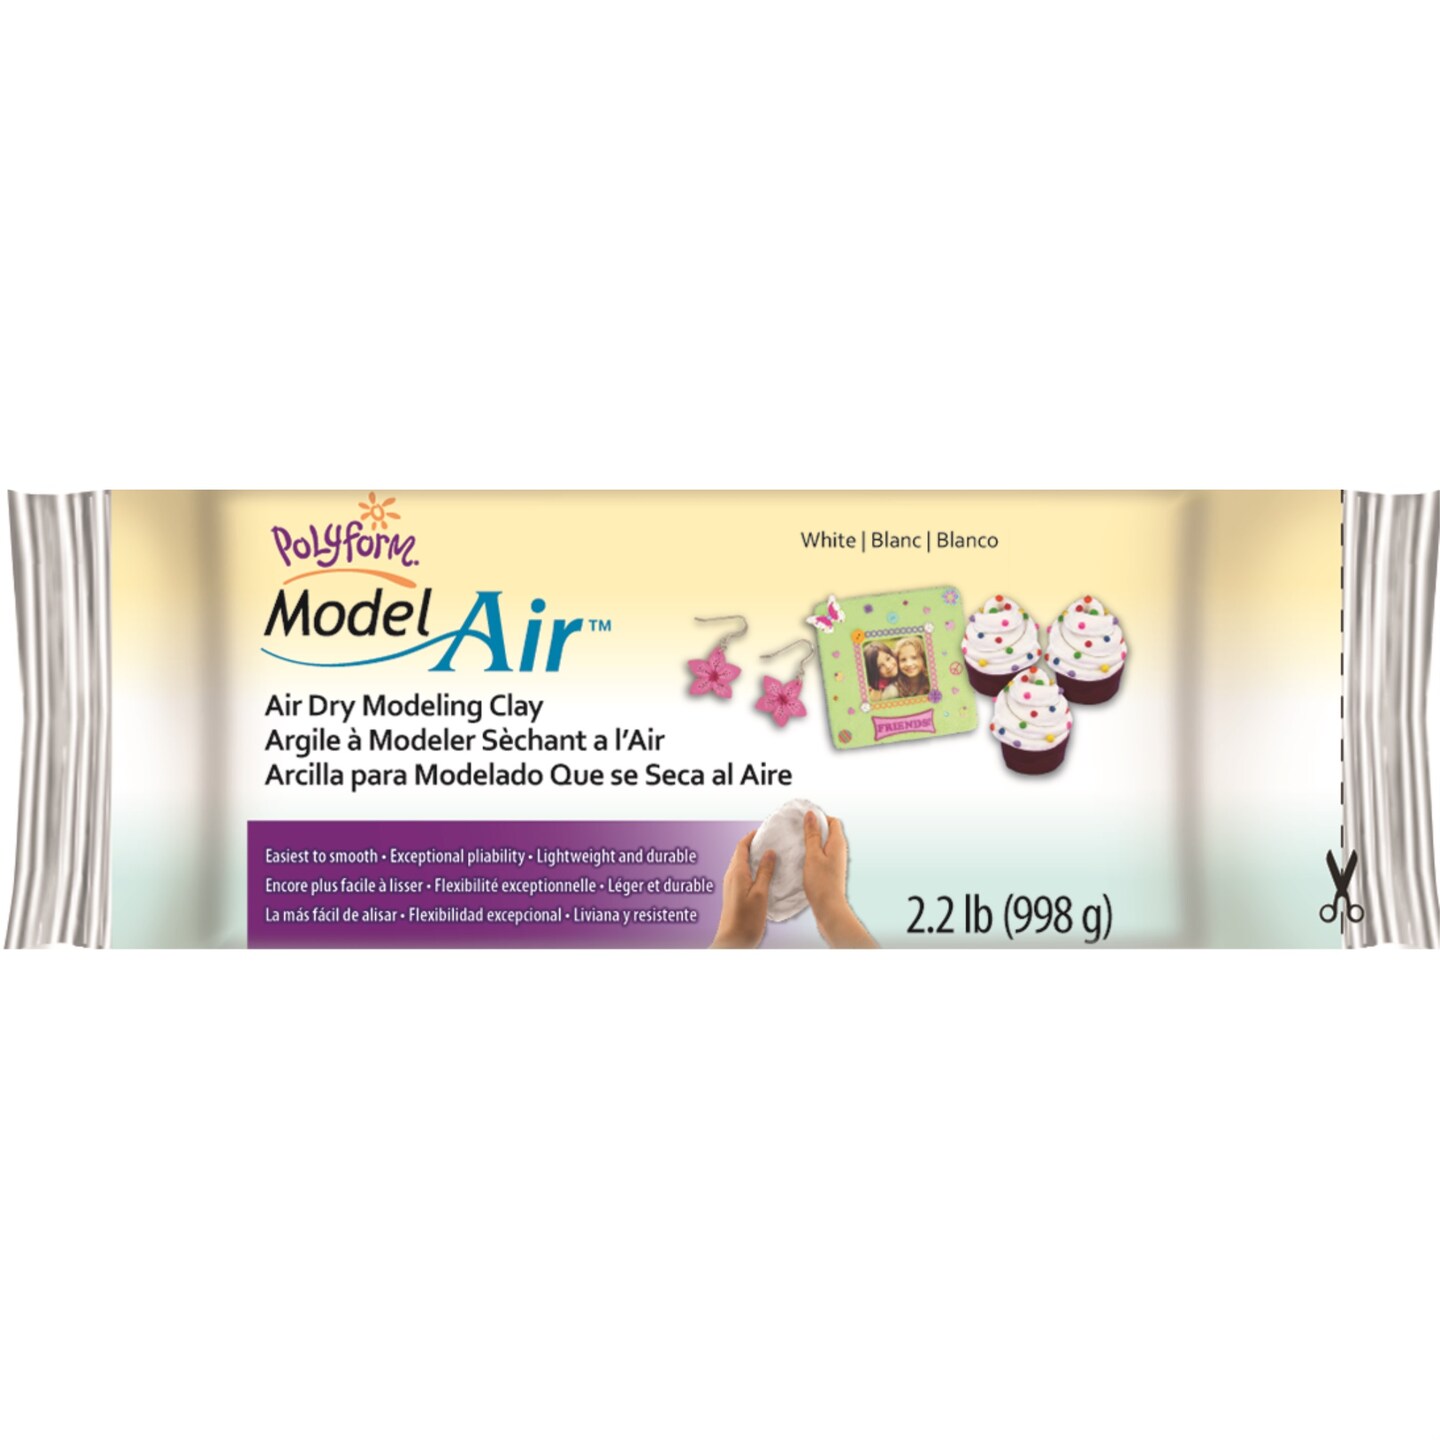 Sculpey Air-Dry White, Non Toxic, Air Dry Clay, 2.2 pound bar great for modeling, sculpting, holiday, handprints, DIY and school projects. Great for all skill levels.